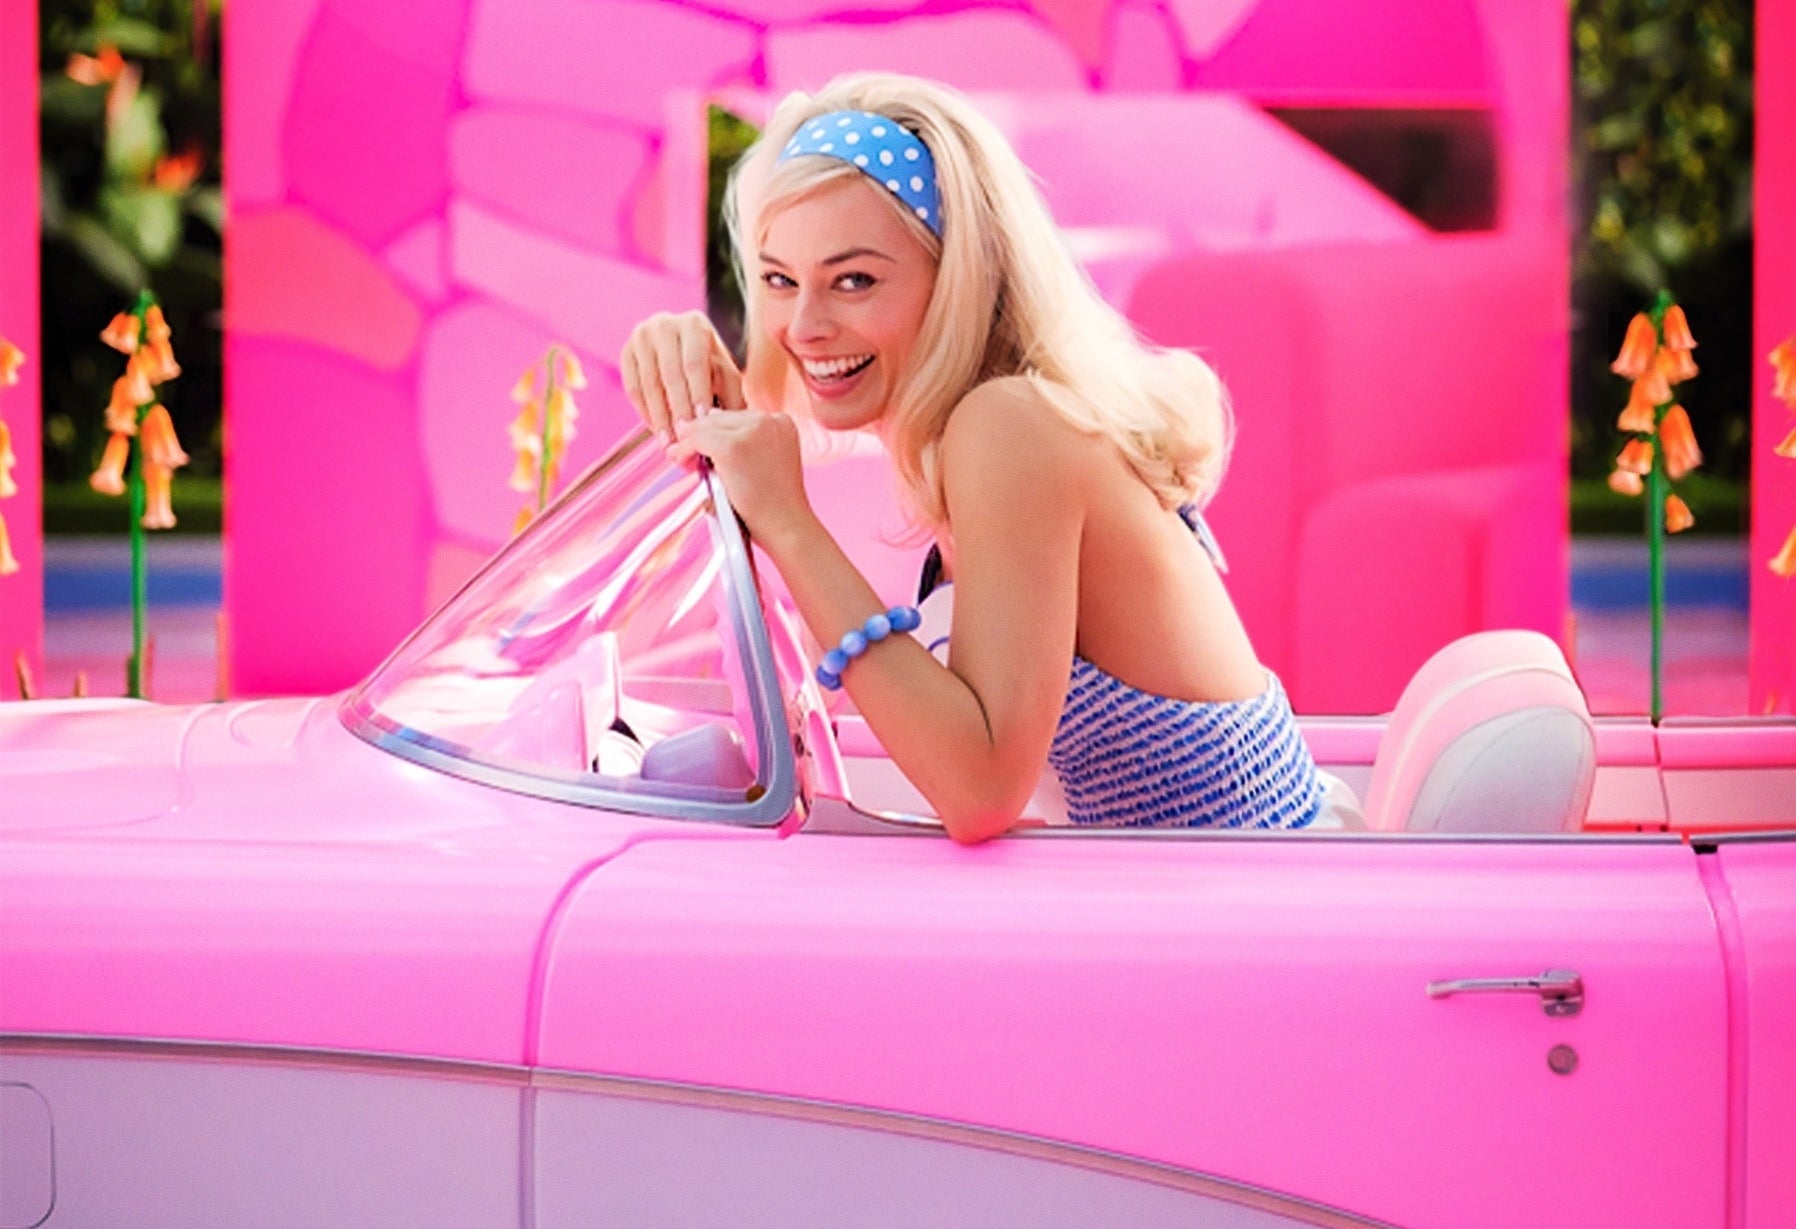 Margot as Barbie smiling while sitting in a Barbie pink convertible